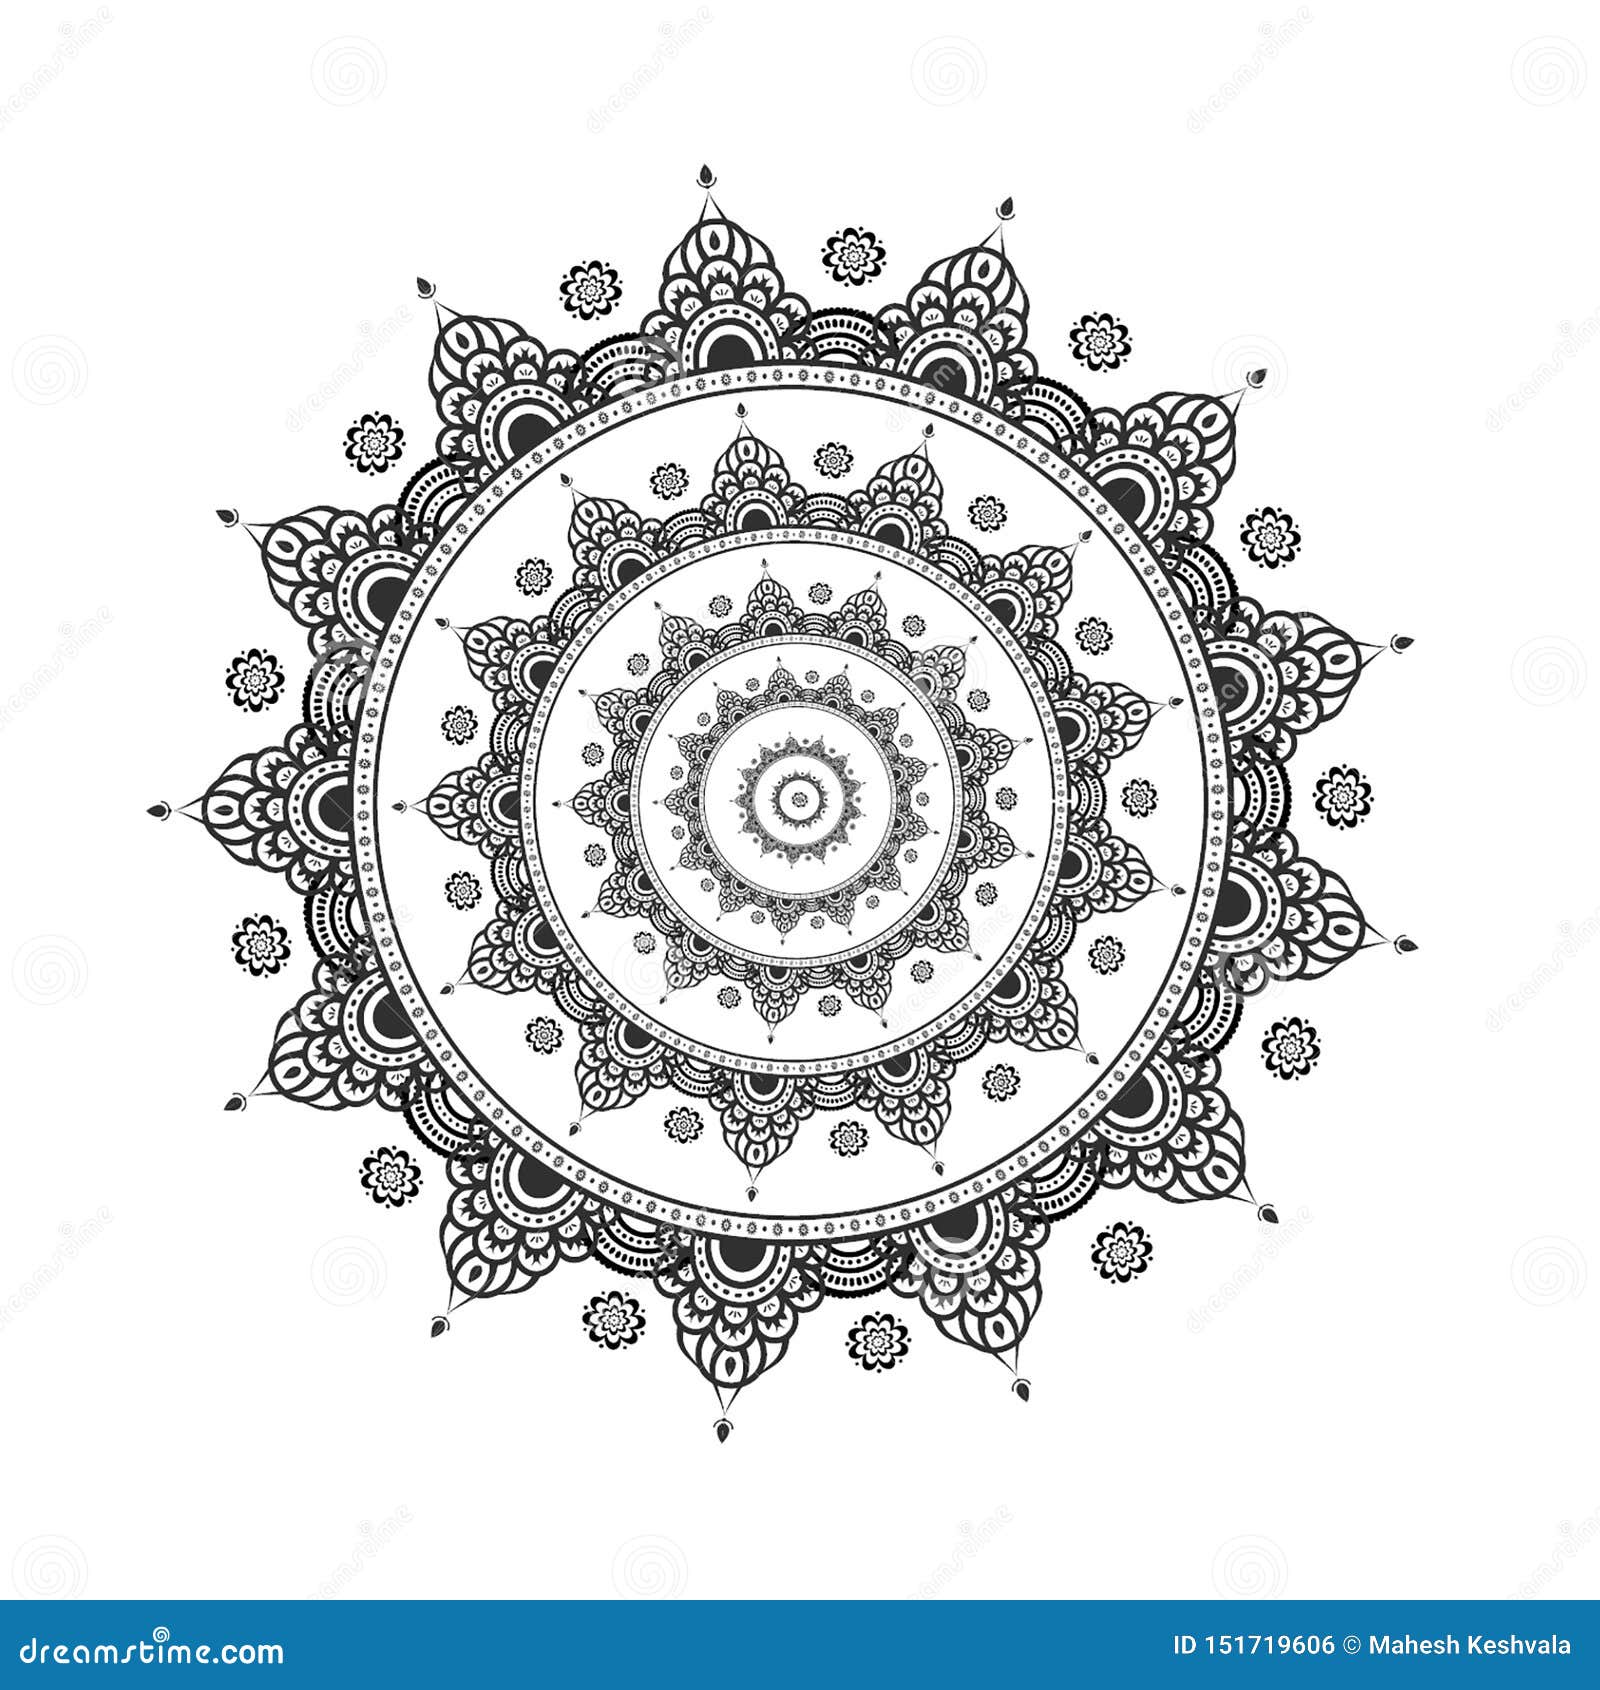 mandalas for coloring book. decorative round ornaments. unusual flower 